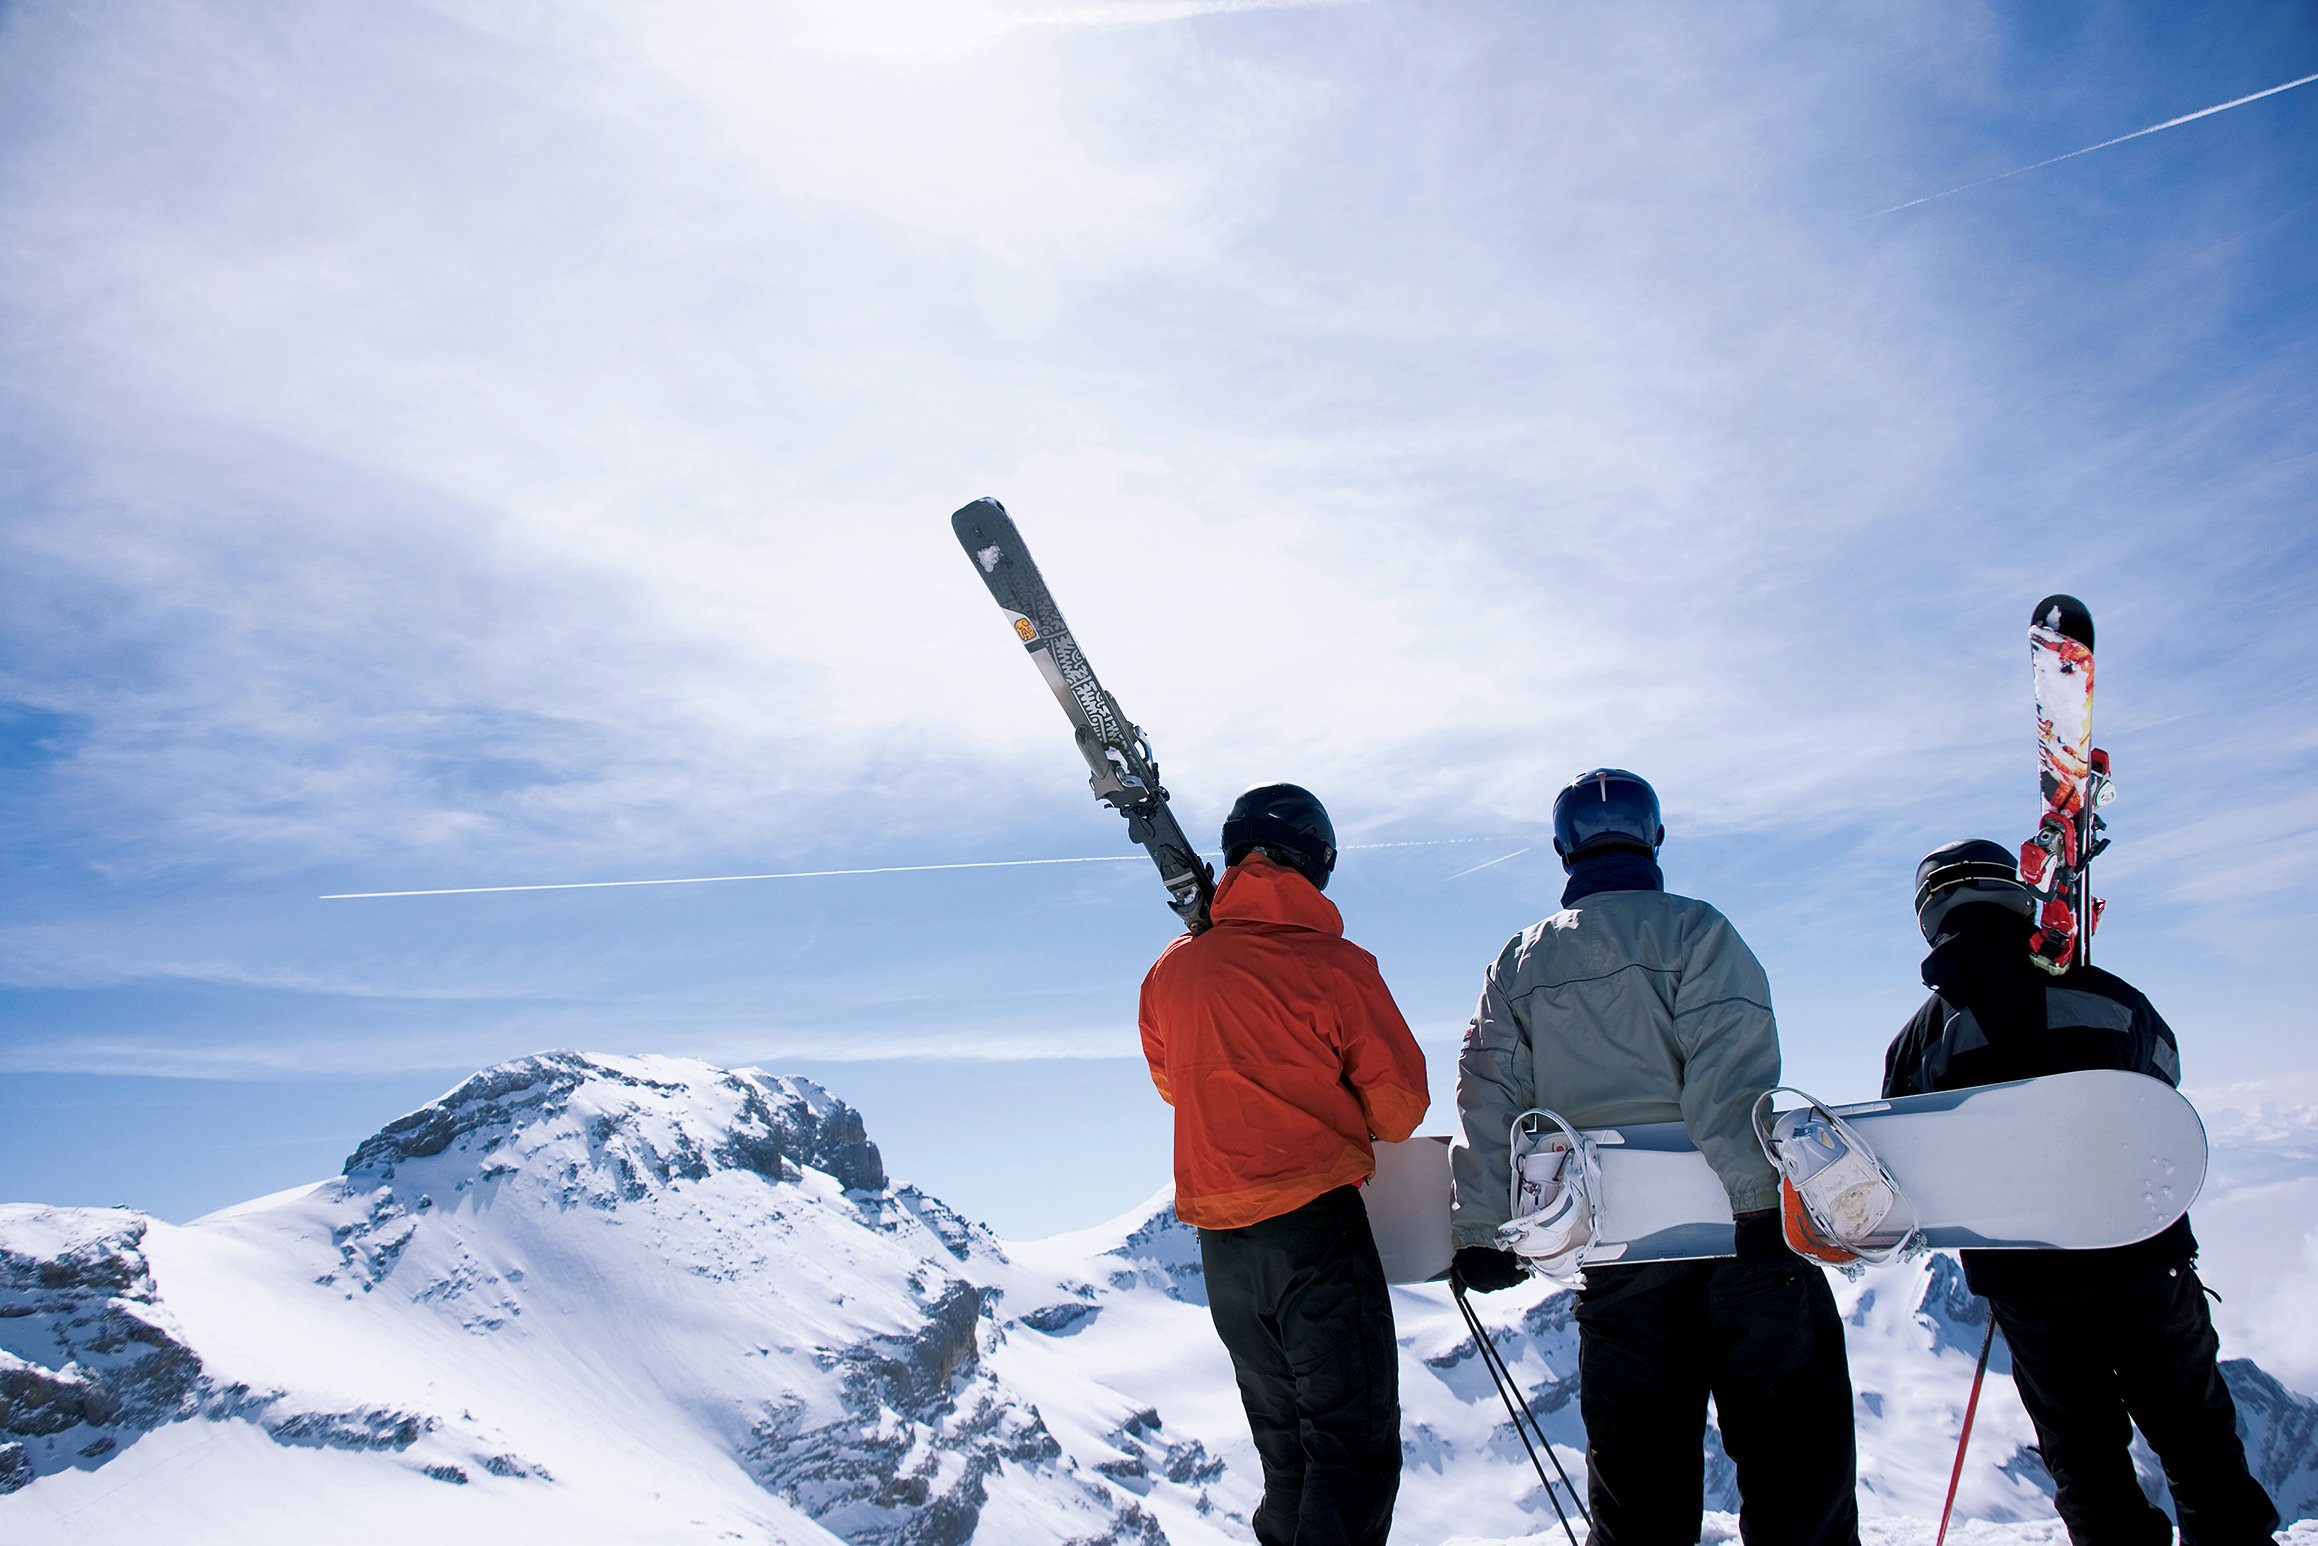 facts about skiing injuries